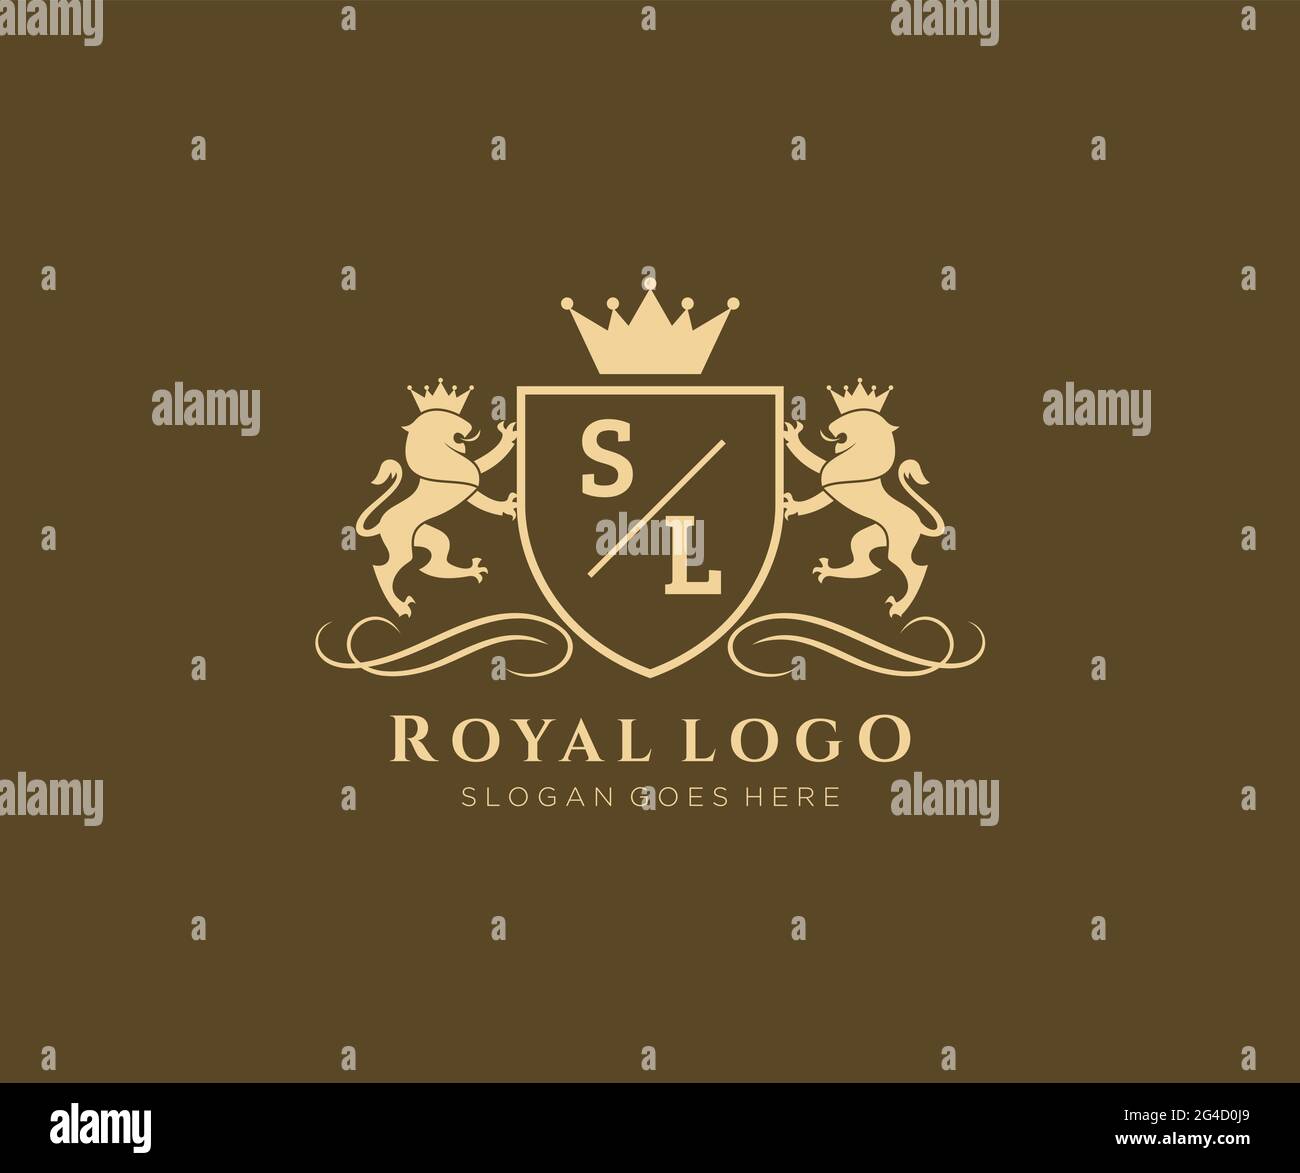 SL Letter Lion Royal Luxury Heraldic,Crest Logo template in vector art for Restaurant, Royalty, Boutique, Cafe, Hotel, Heraldic, Jewelry, Fashion and Stock Vector